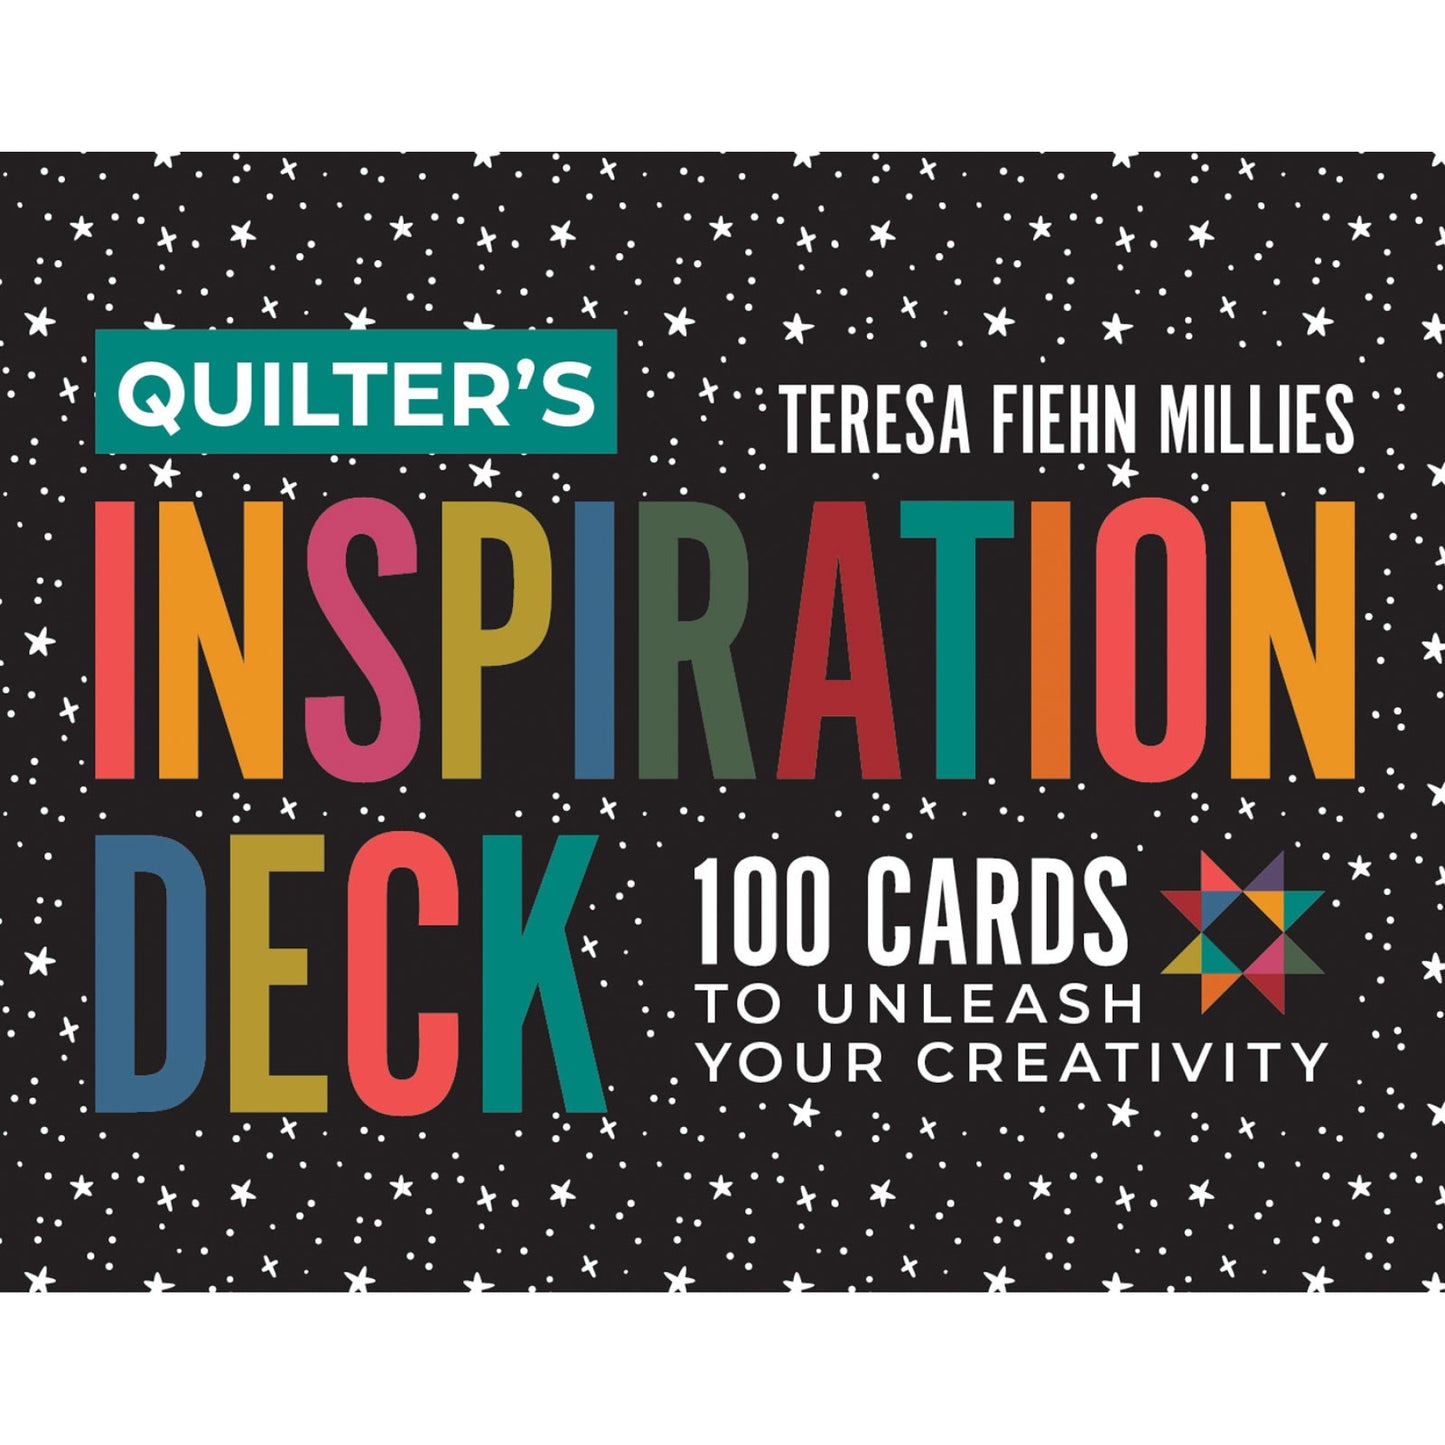 Quilter's Inspiration Card Deck